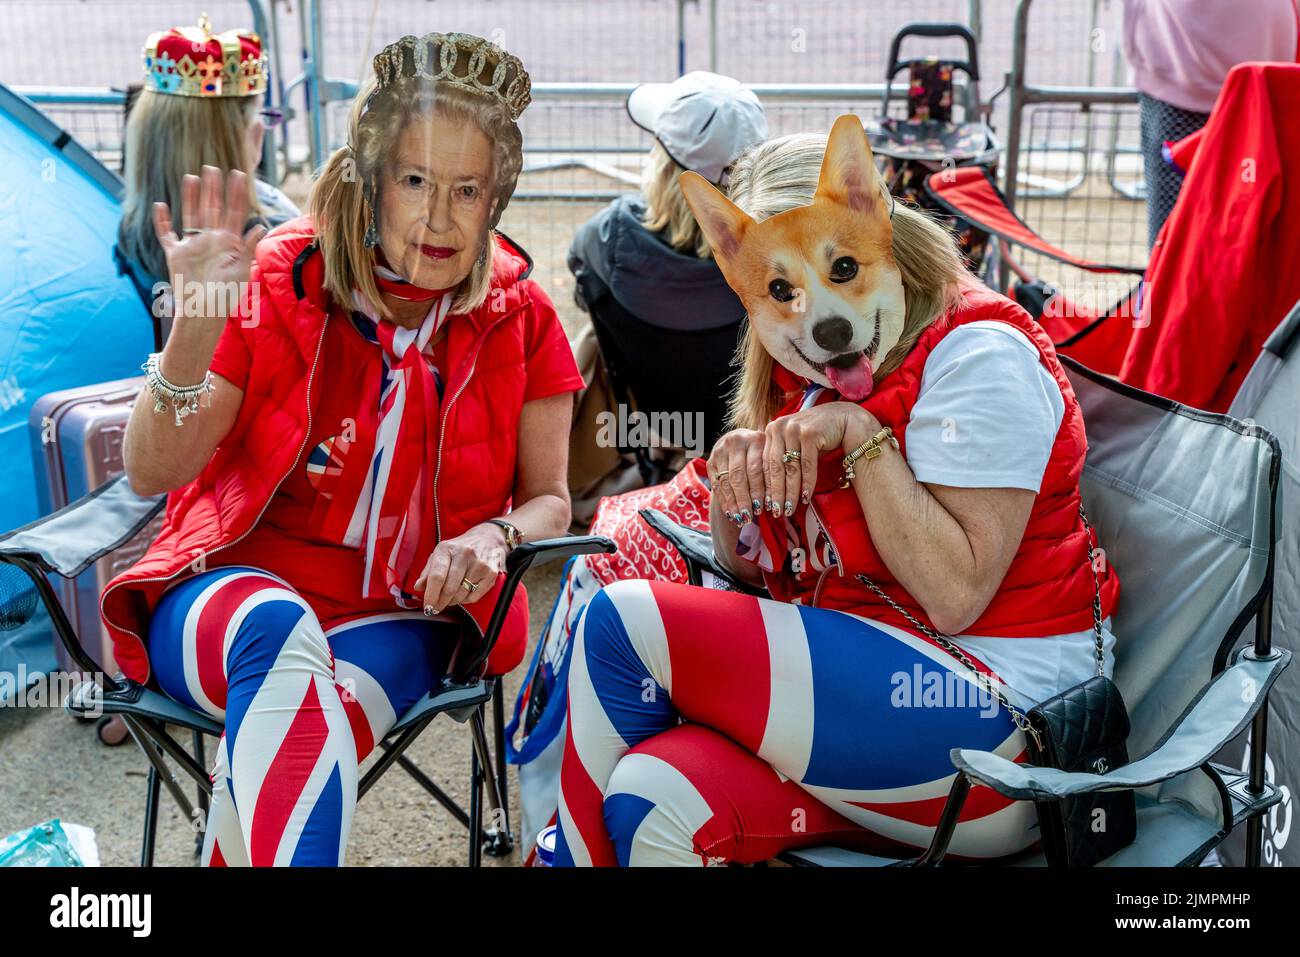 People In Fancy Dress Camp Out Overnight In The Mall For A Good Vantage Spot Before The Queen's Birthday Parade, London, UK. Stock Photo